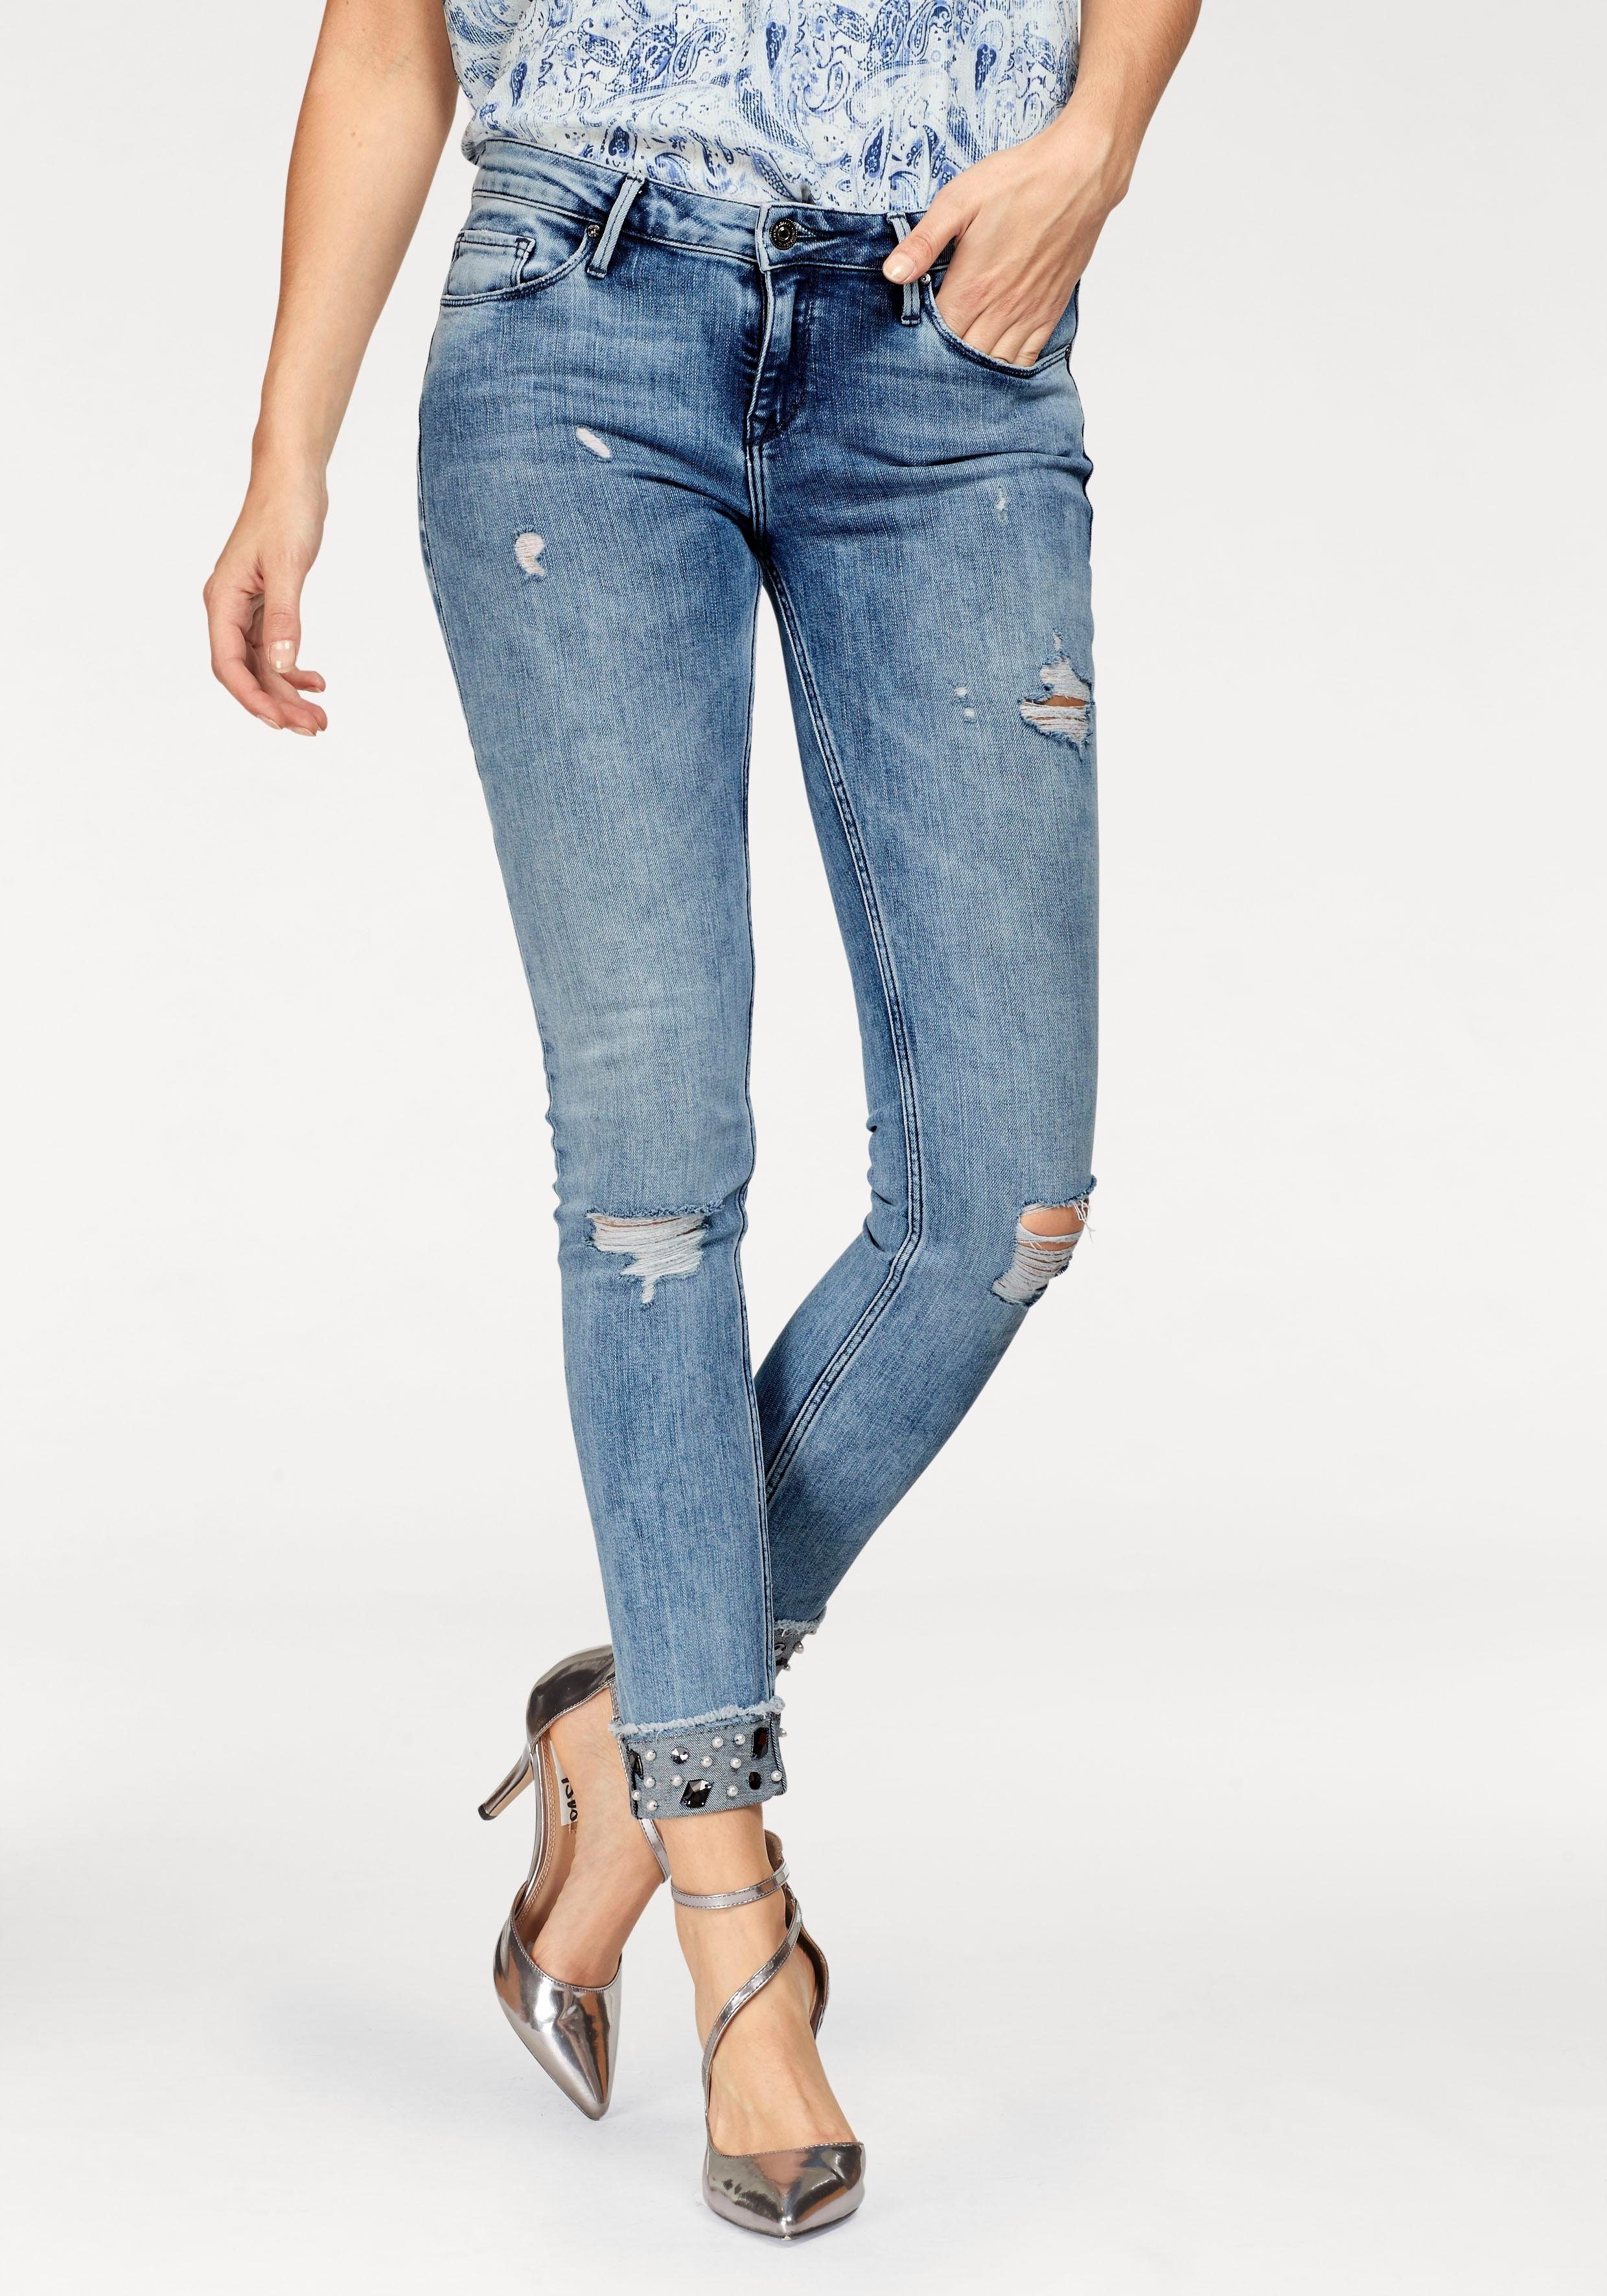 Otto - Cross Jeans NU 15% KORTING: Cross Jeans® stretch jeans